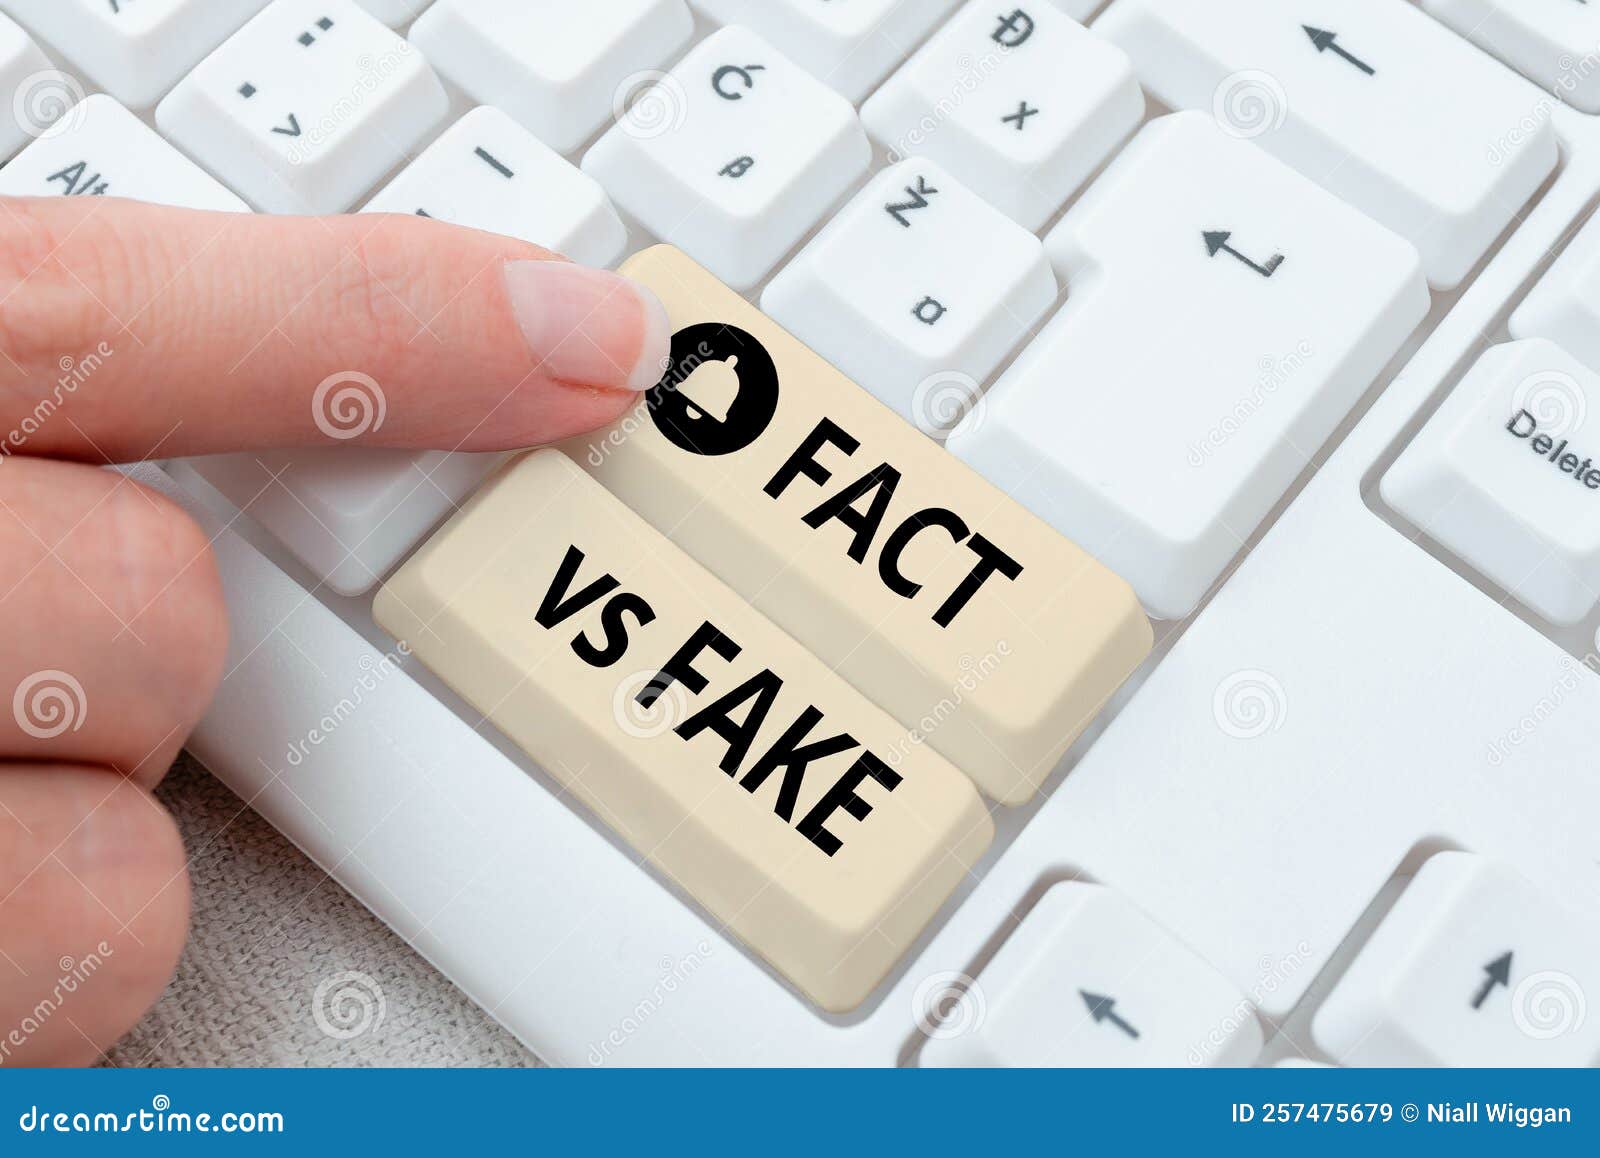 sign displaying fact vs fake. concept meaning rivalry or products or information originaly made or imitation